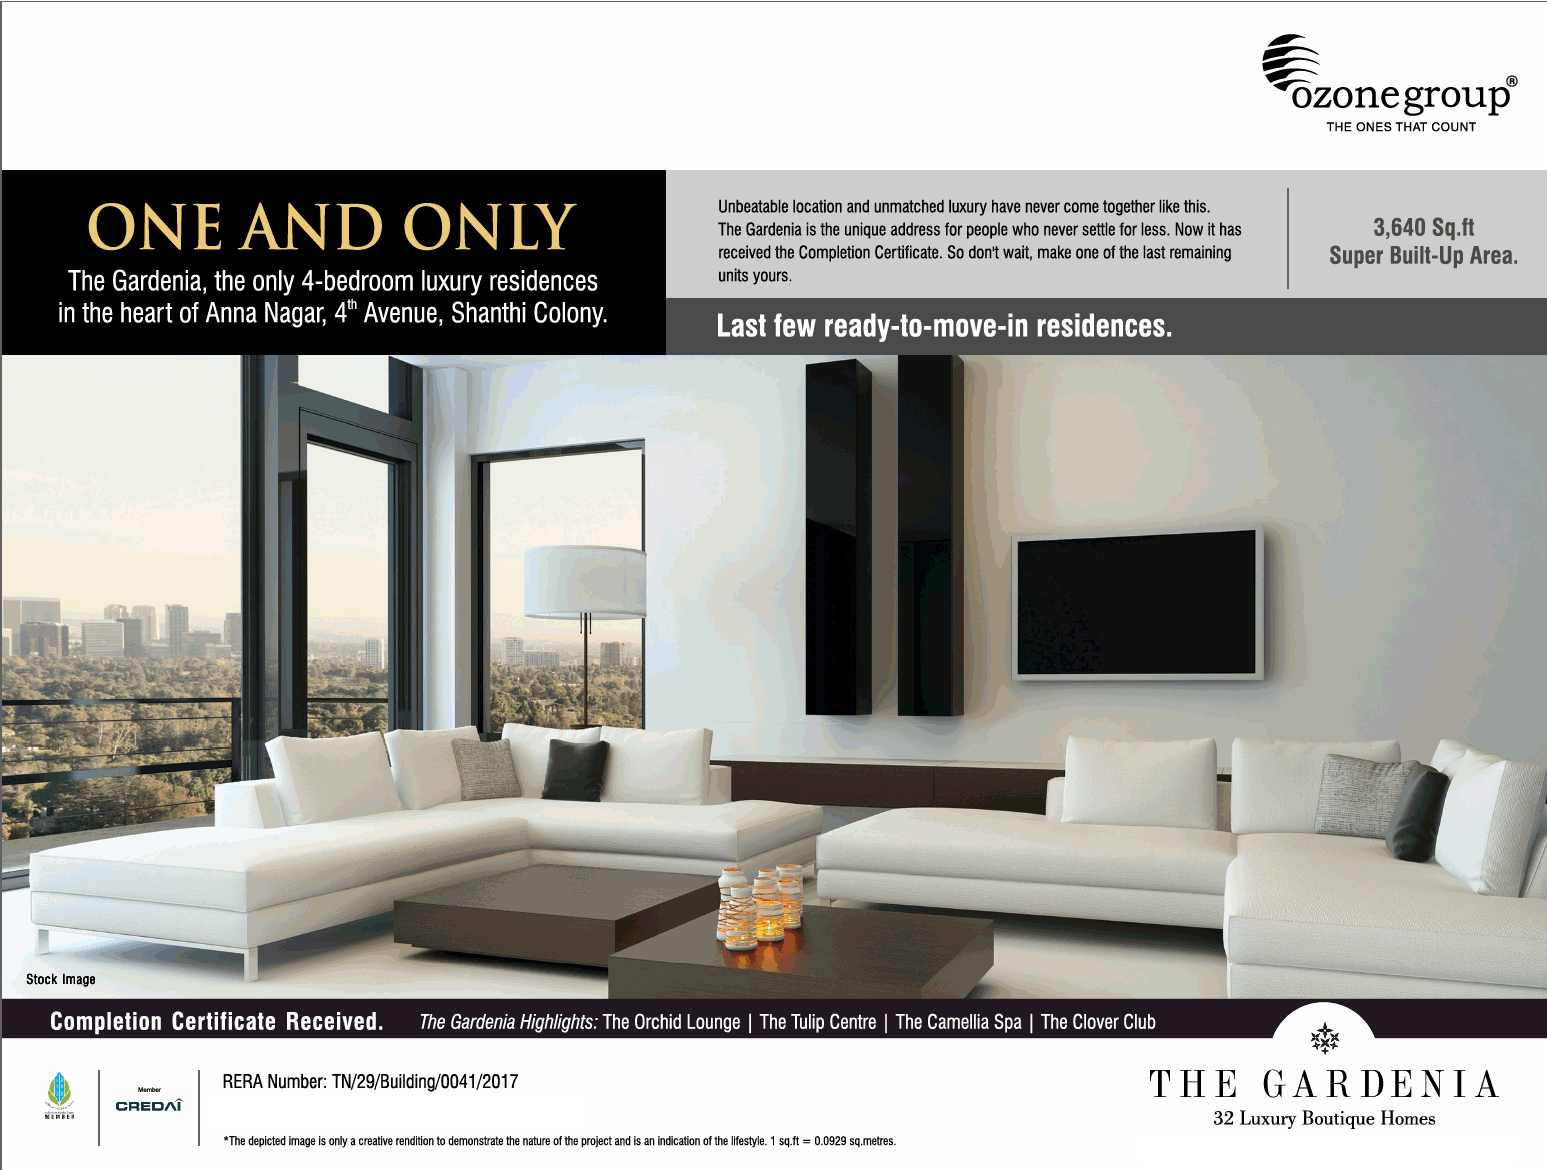 Completion certificate received for Ozone The Gardenia in Chennai